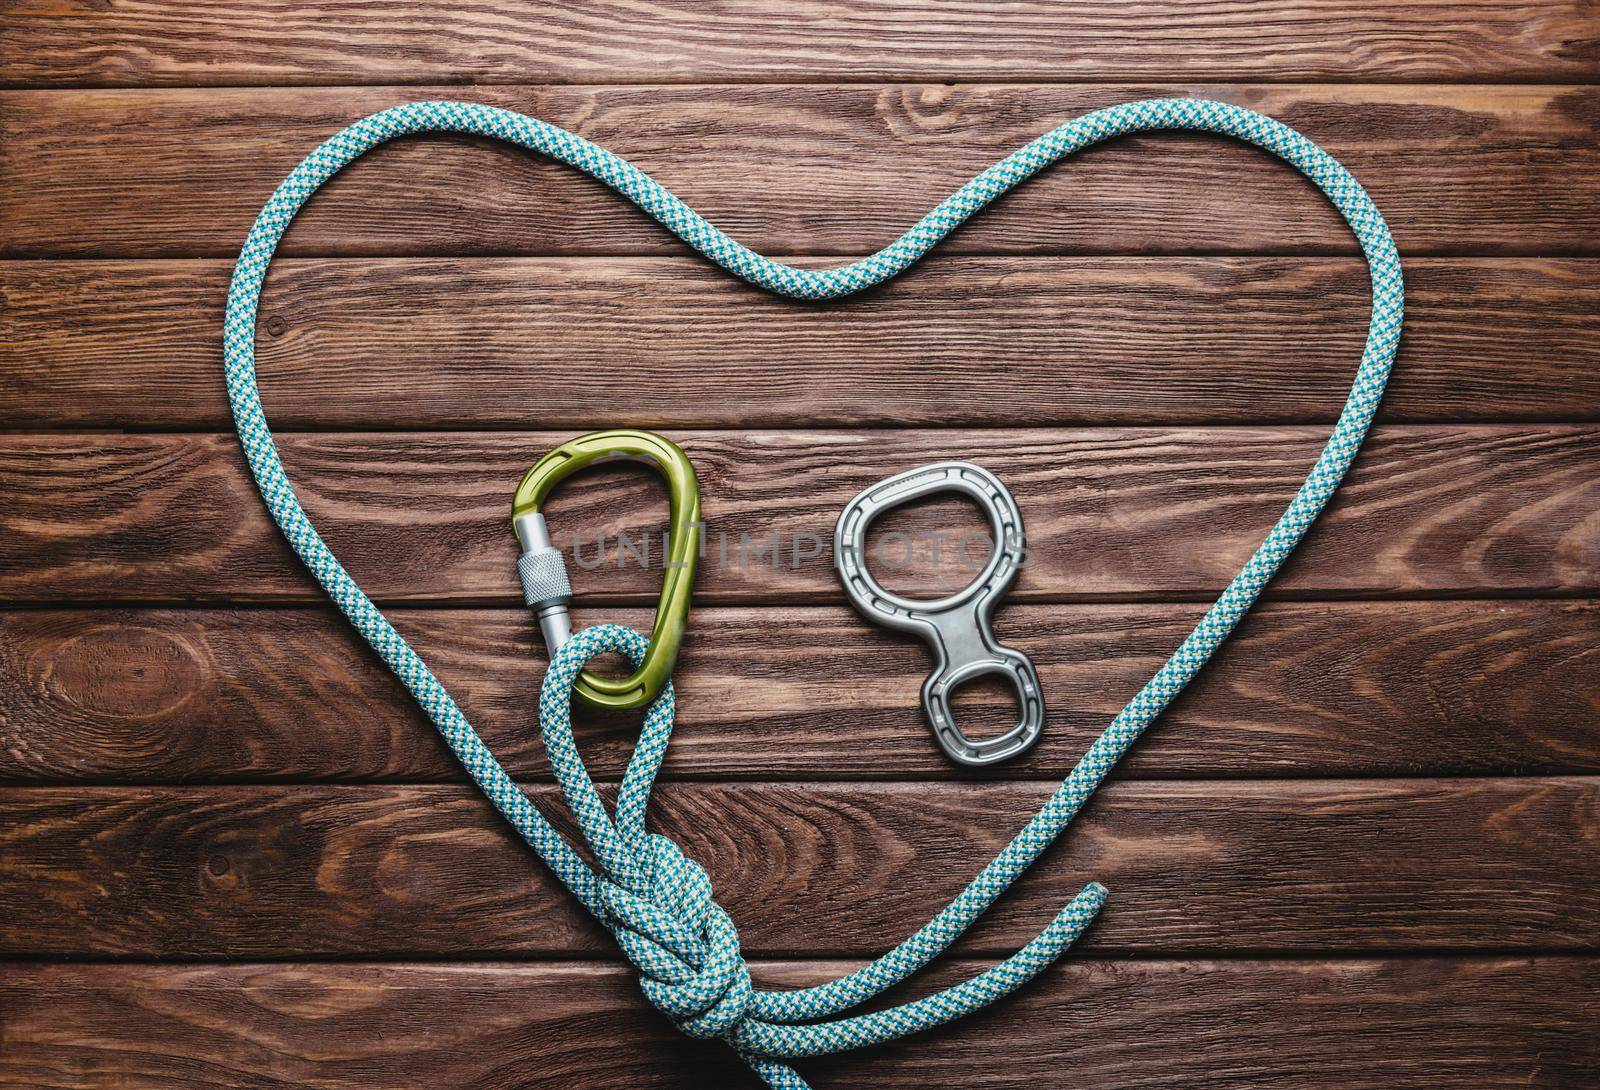 Climbing rope in the shape of a heart with carbine on wooden background, top view.